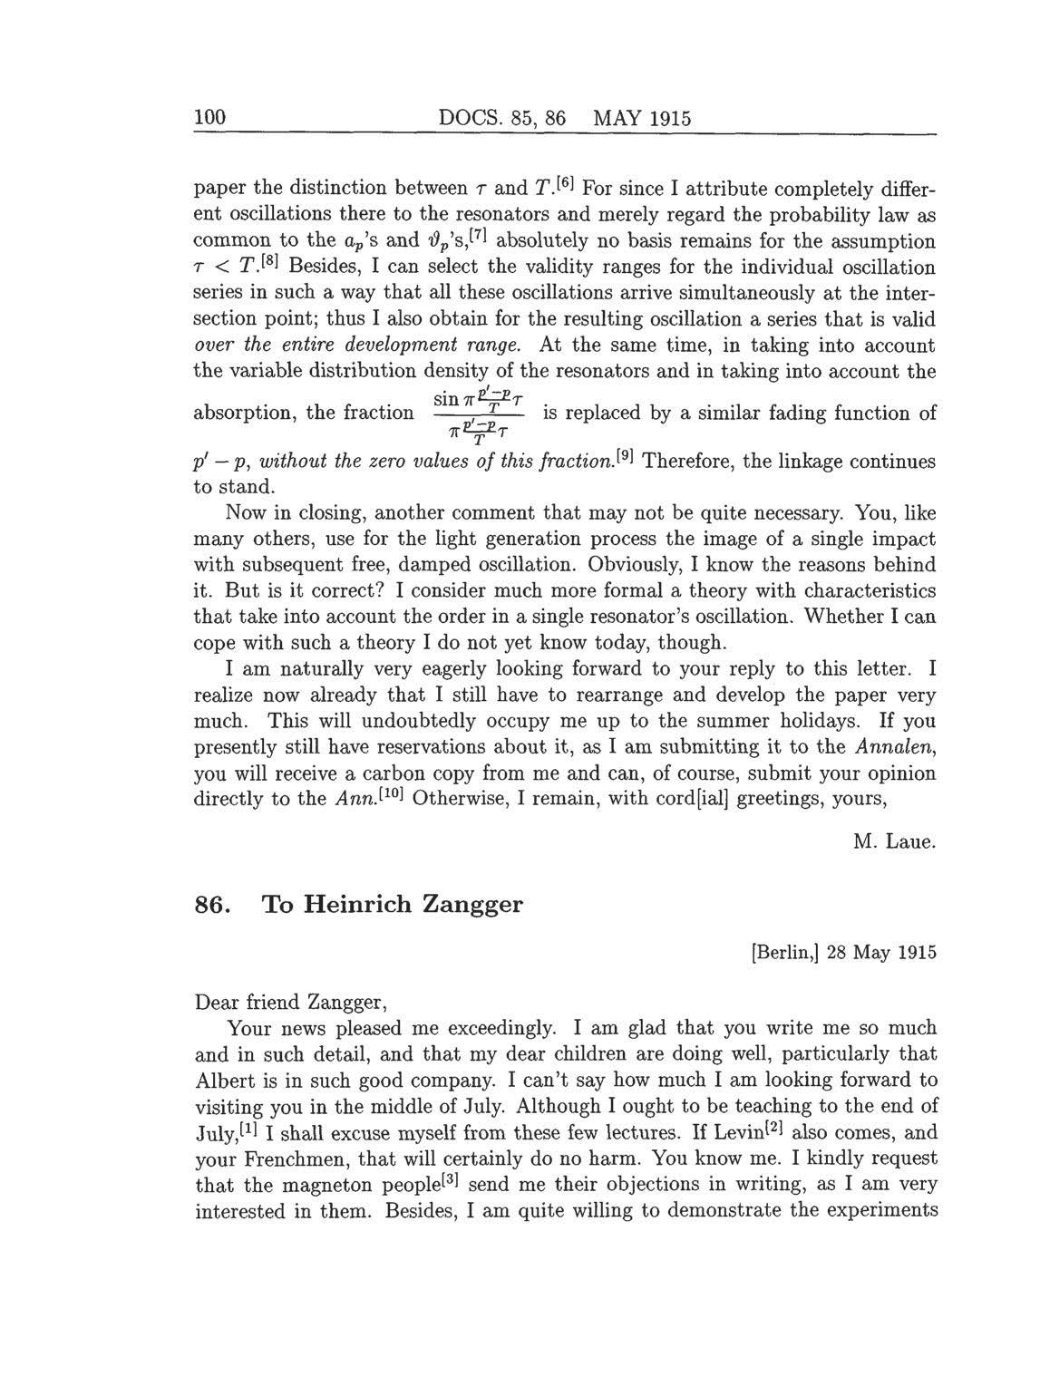 Volume 8: The Berlin Years: Correspondence, 1914-1918 (English translation supplement) page 100